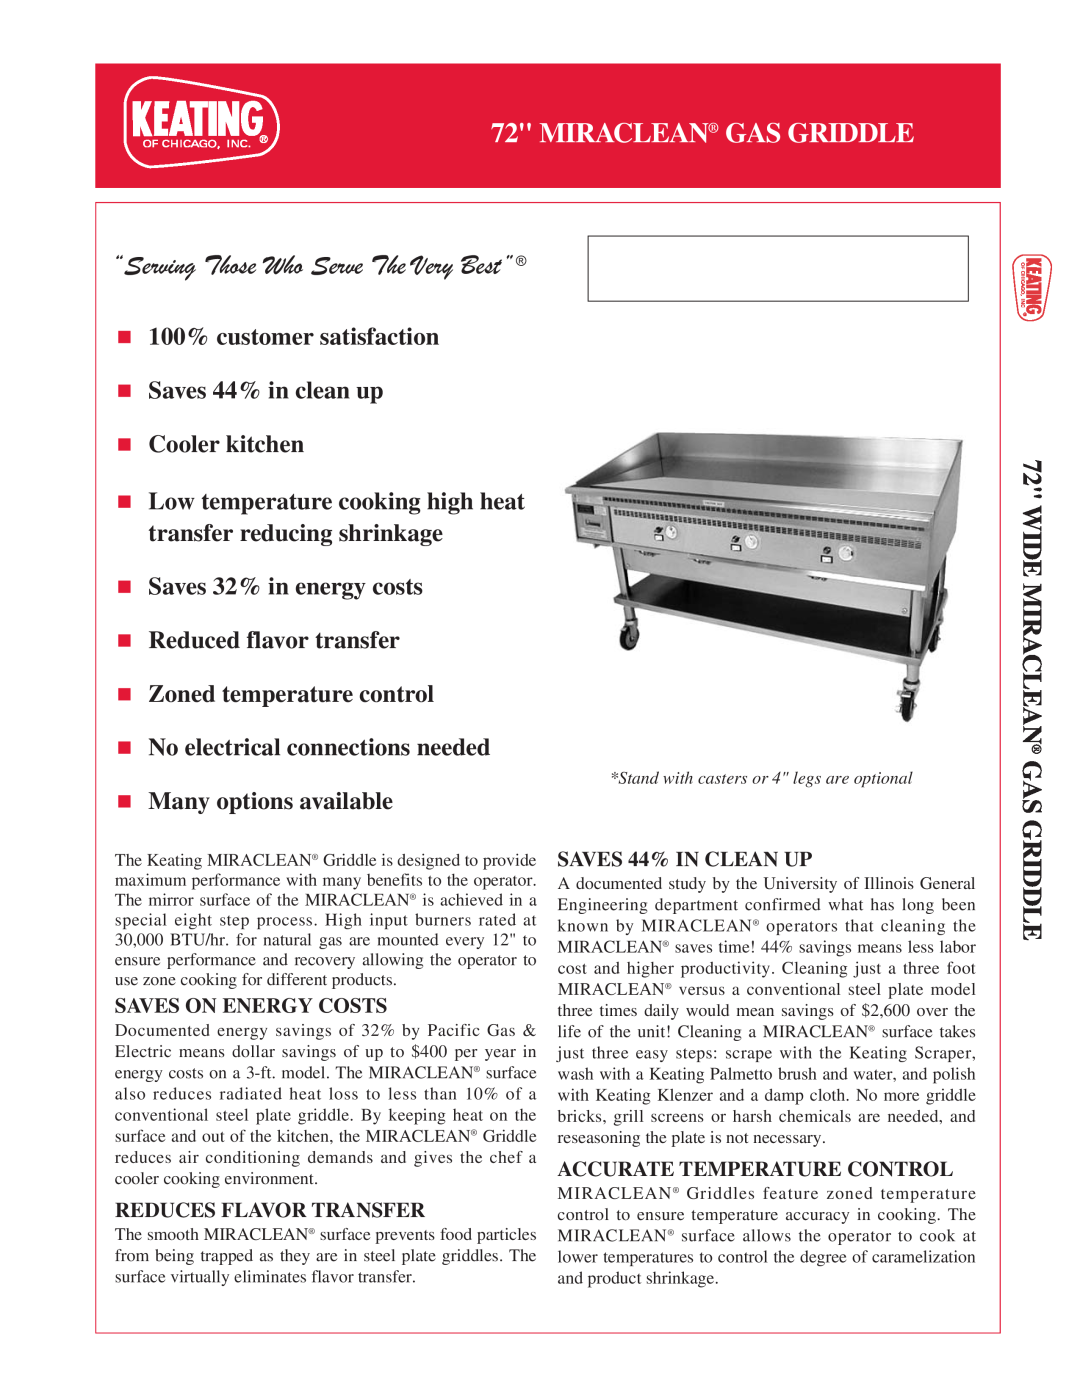 Keating Of Chicago 72 manual Wide Miraclean Gas Griddle, “Serving Those Who Serve The Very Best”, Cooler kitchen 